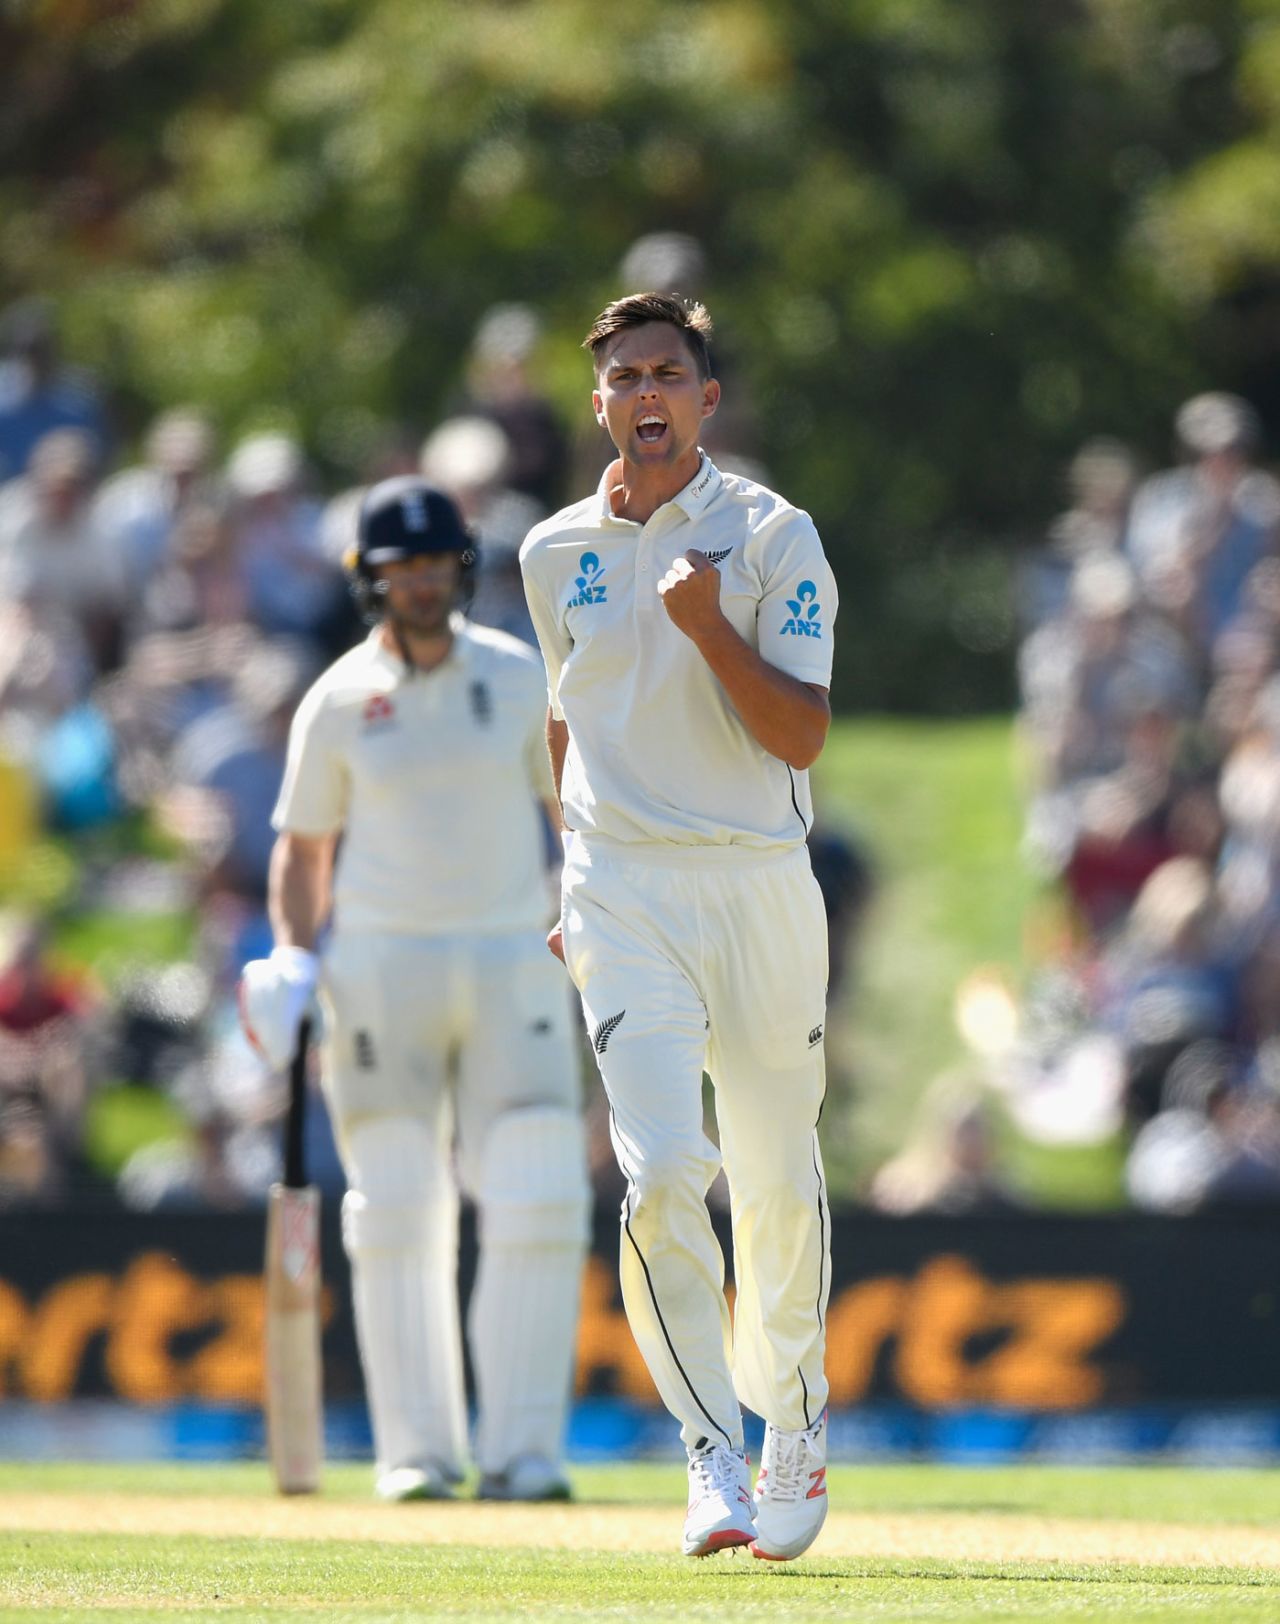 Trent Boult celebrates after trapping Dawid Malan, New Zealand v England, 2nd Test, Christchurch, 1st day, March 30, 2018